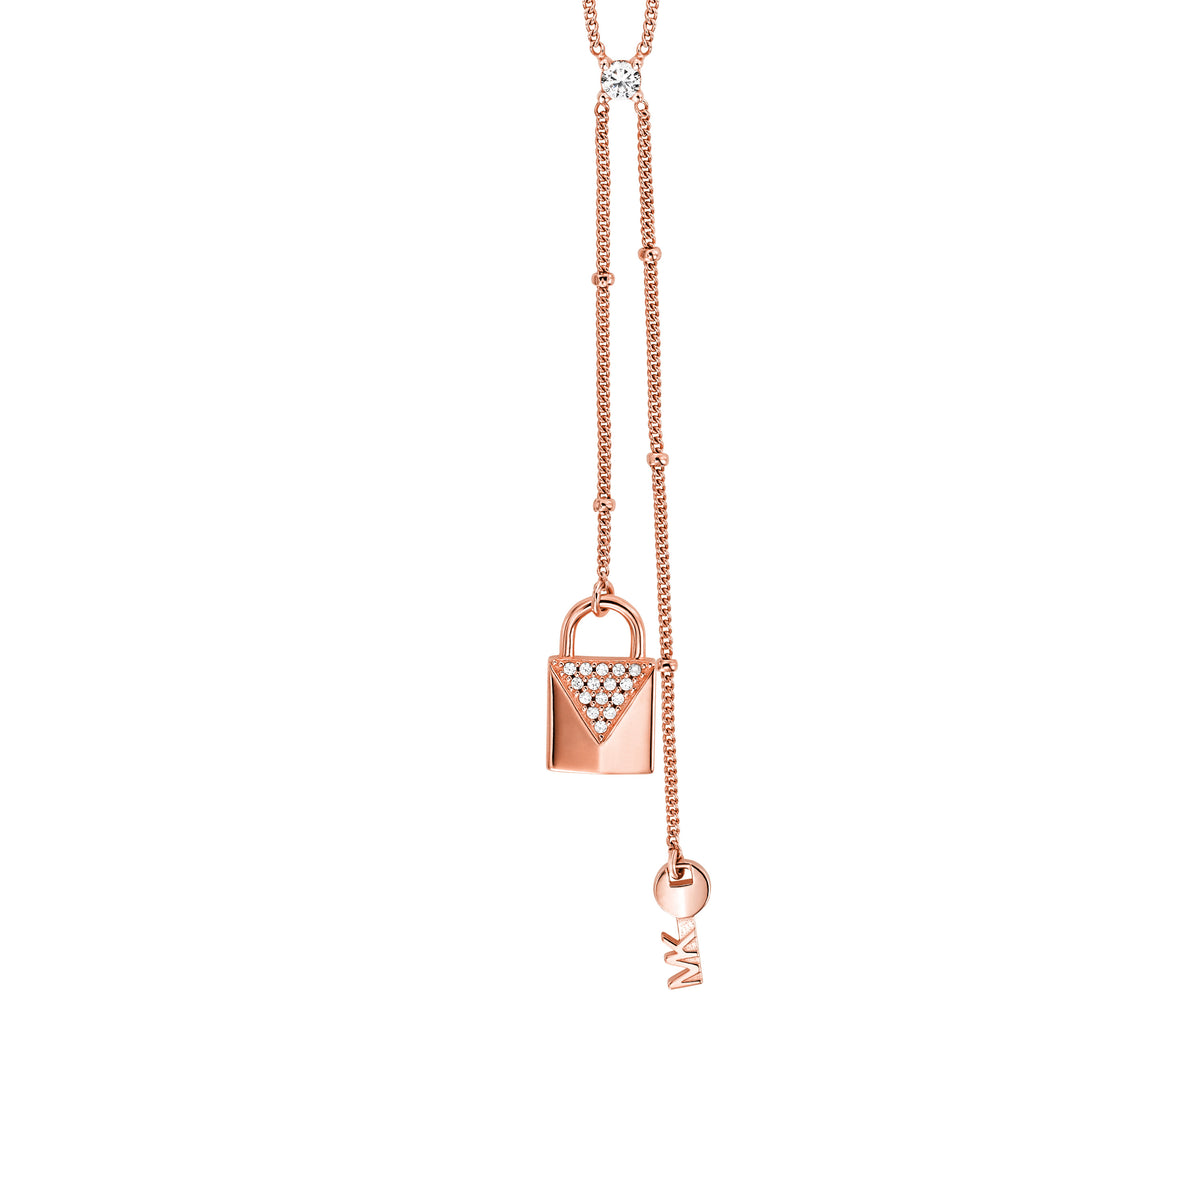 michael kors lock and key necklace